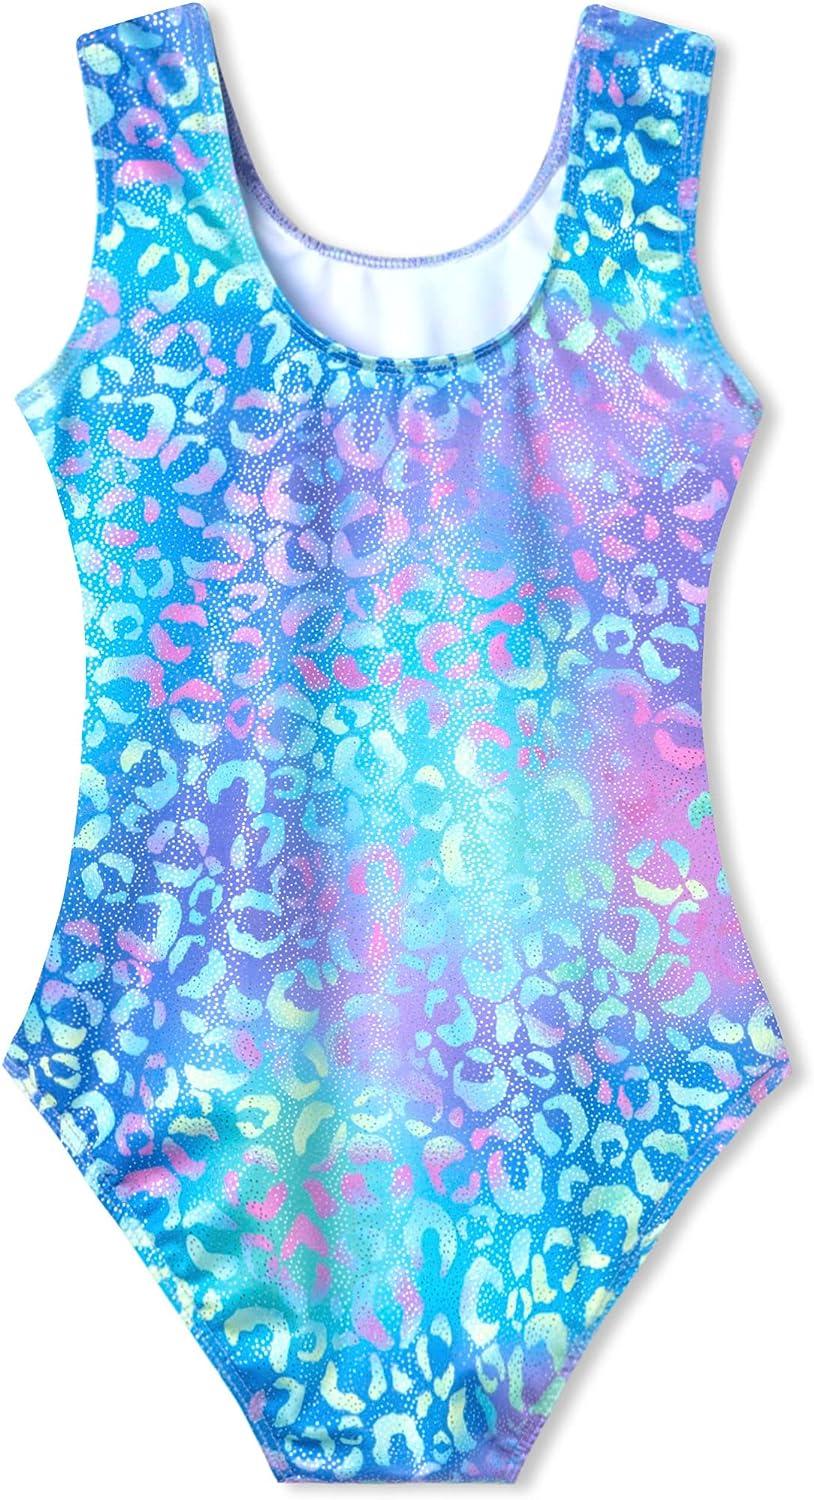 EASTBUDDY Long Sleeve Leotards for Girls Gymnastics Sparkly Toddler  Gymnastics Leotard Tumbling Outfit 3-14 Years